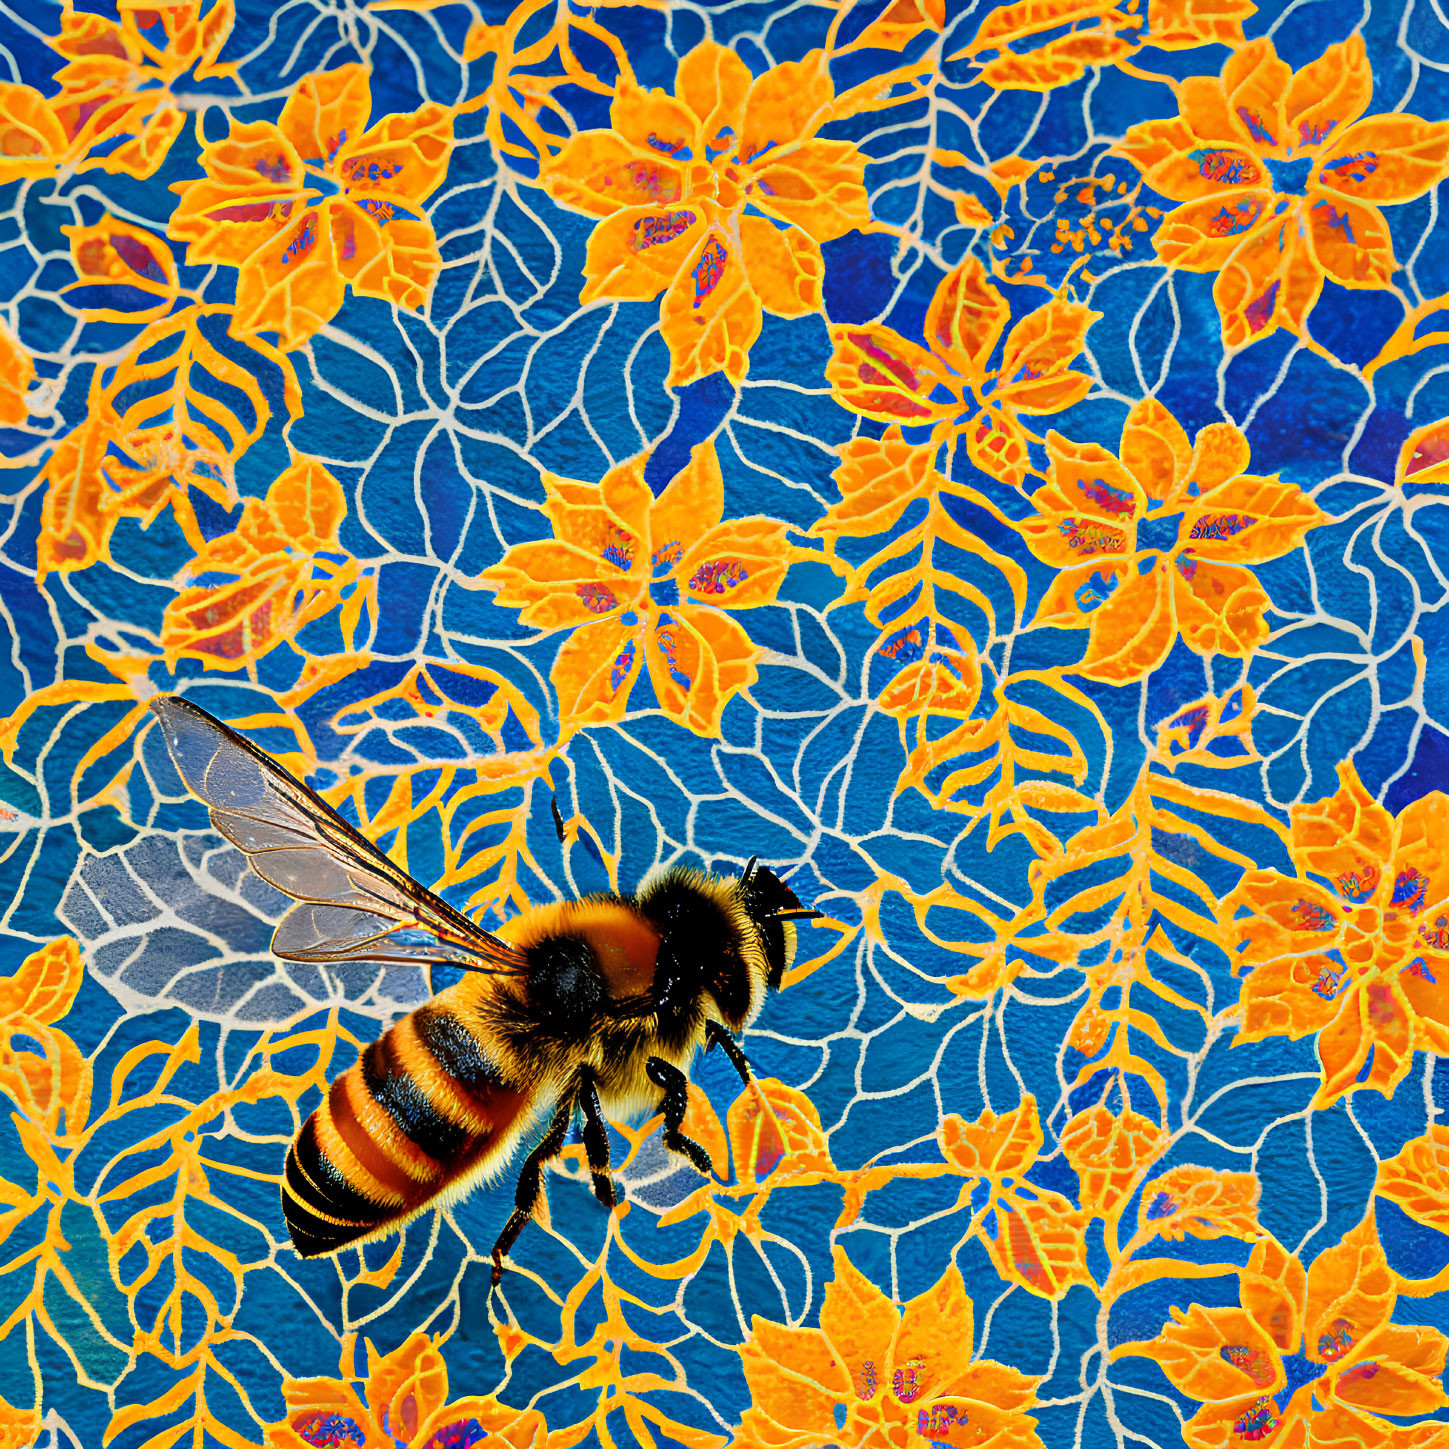 Realistic bee digital artwork on textured blue background with floral patterns